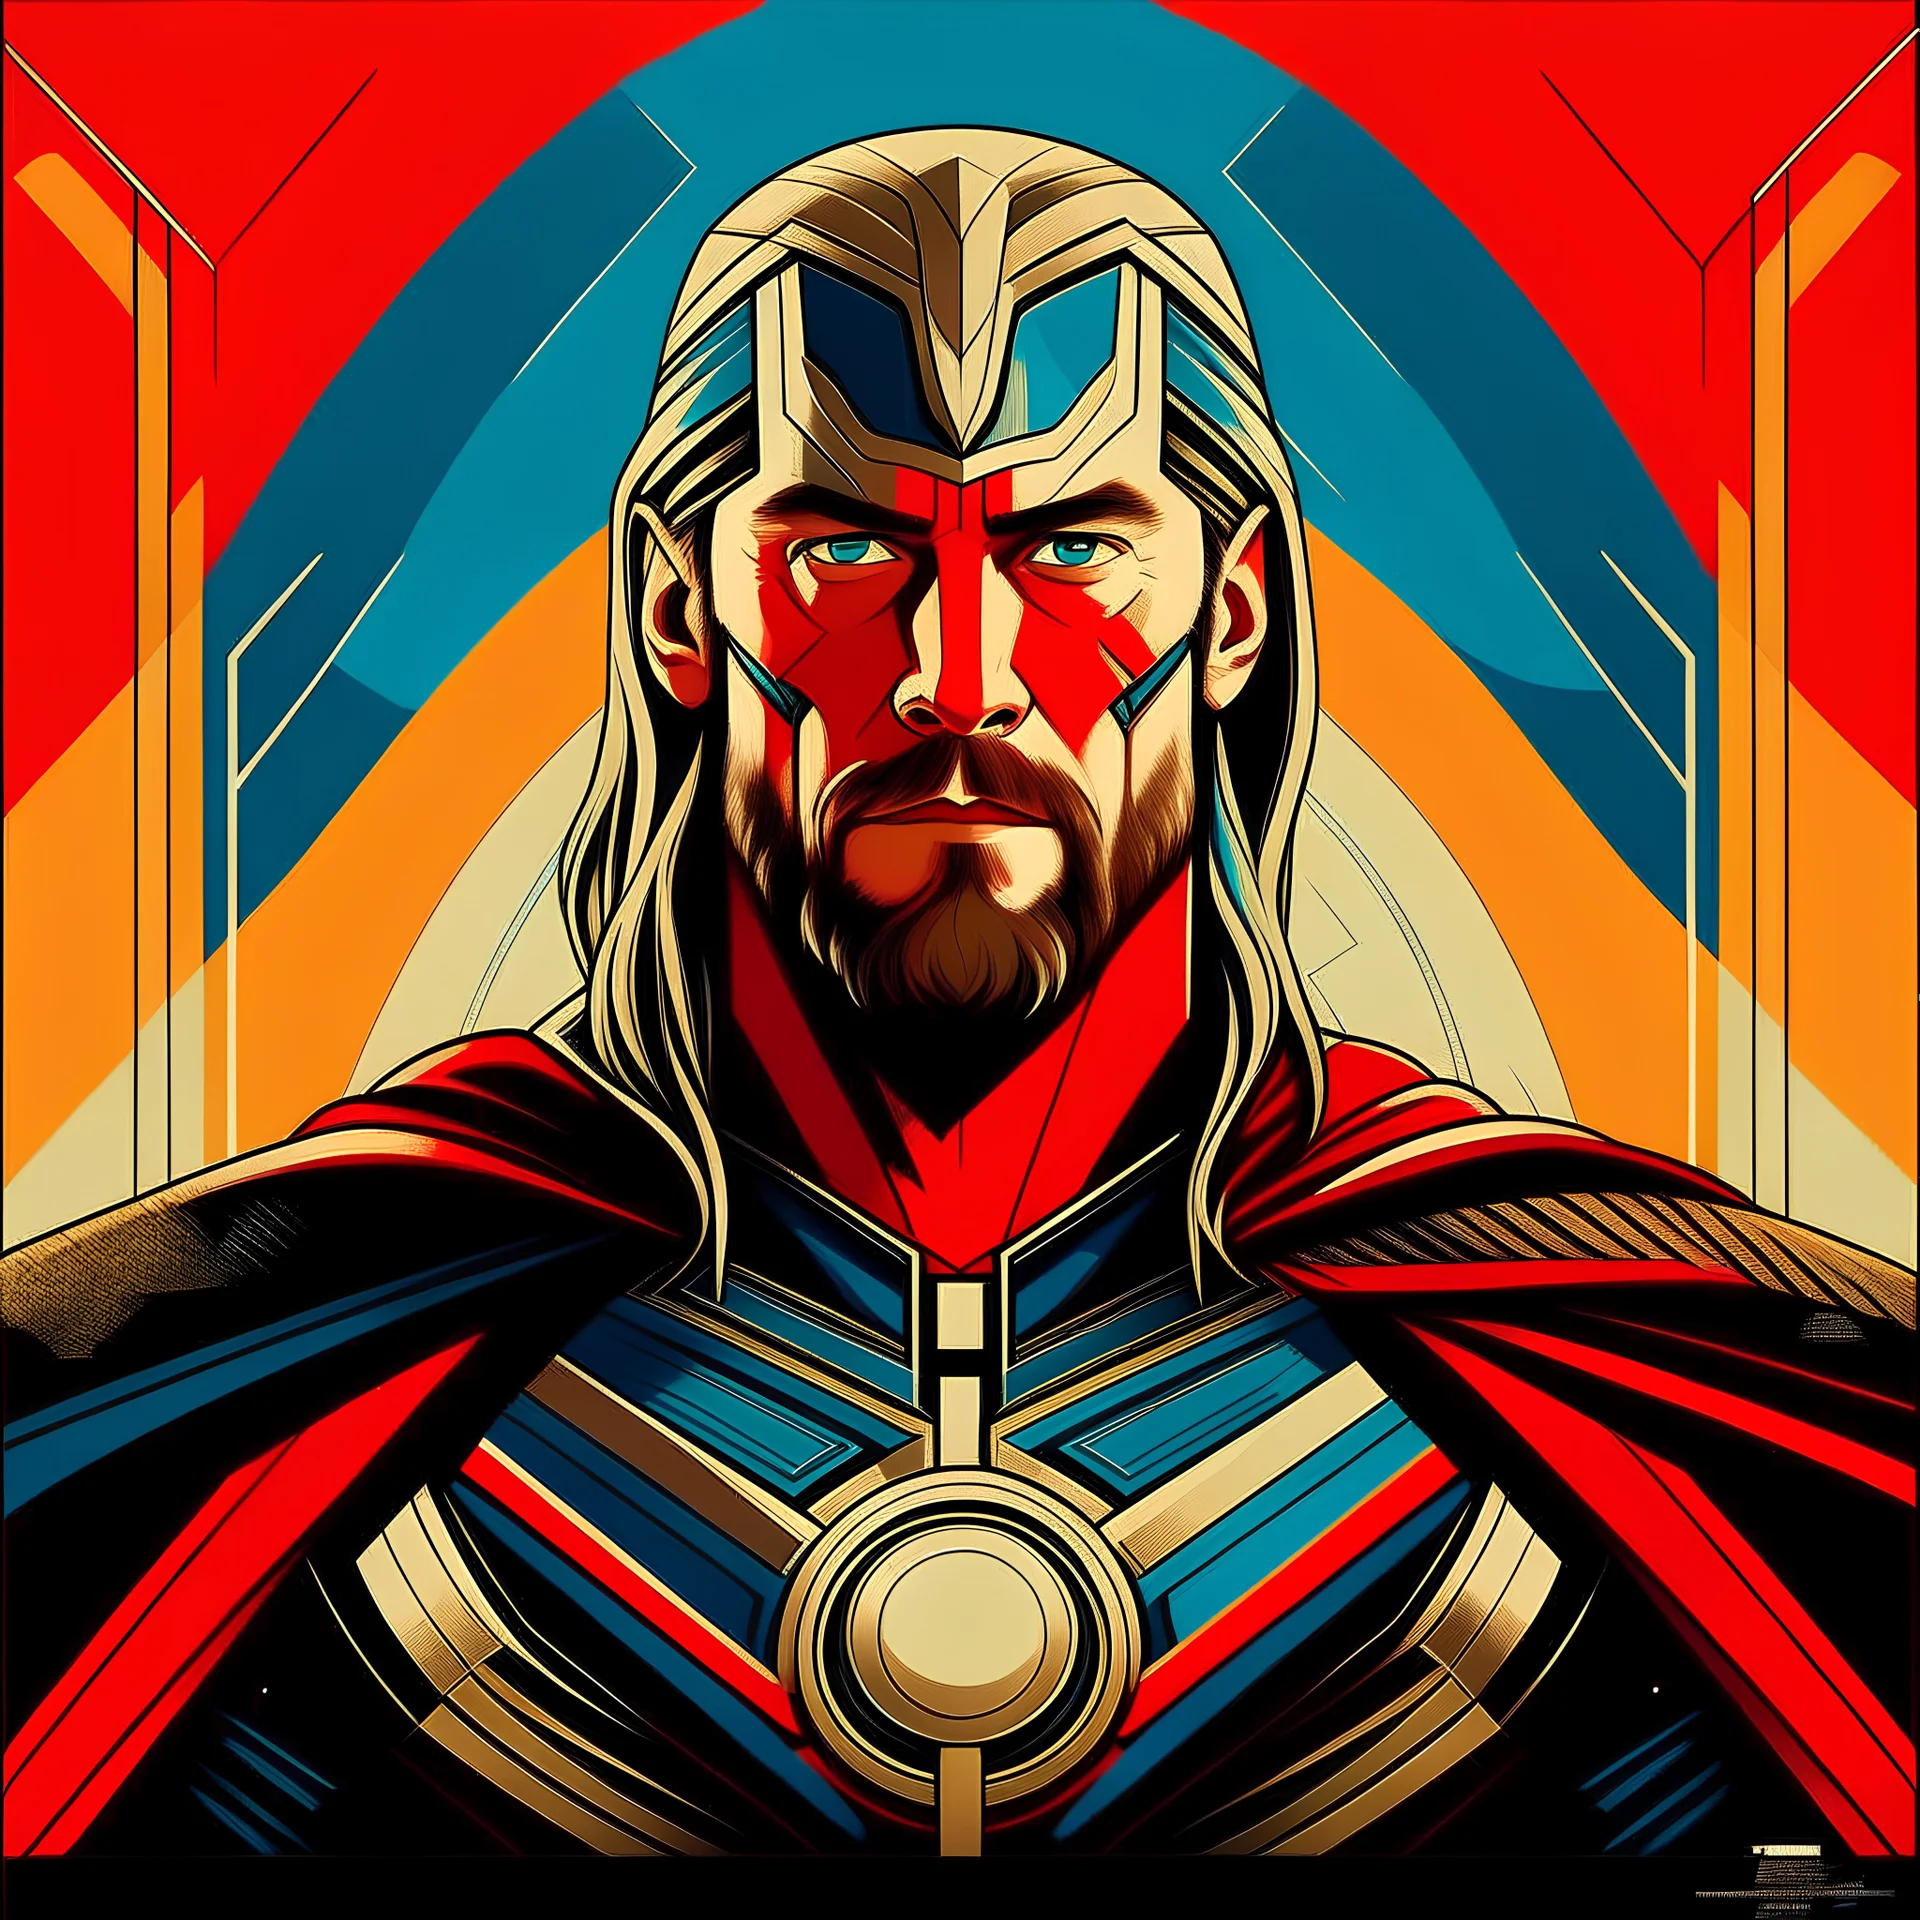 Create a high-definition art-deco style image of a character inspired by MCU's Thor. The image should feature bold, streamlined geometric shapes and a limited color palette of four striking colors that reflect the character's traditional color scheme. The character should be positioned front. The background should incorporate stylized art-deco movement.